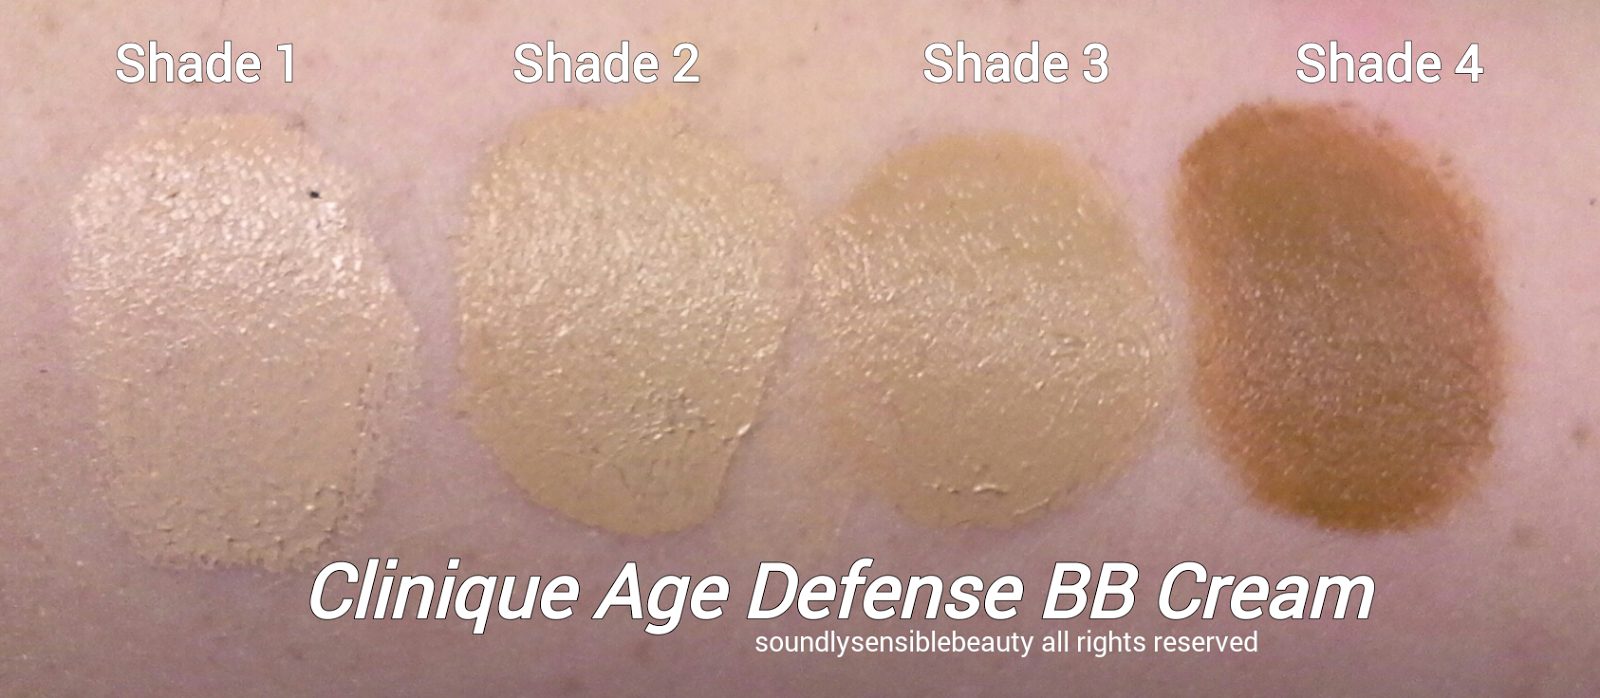 CLinique Age Defense BB Cream SPF 30 Review & Shades Swatches